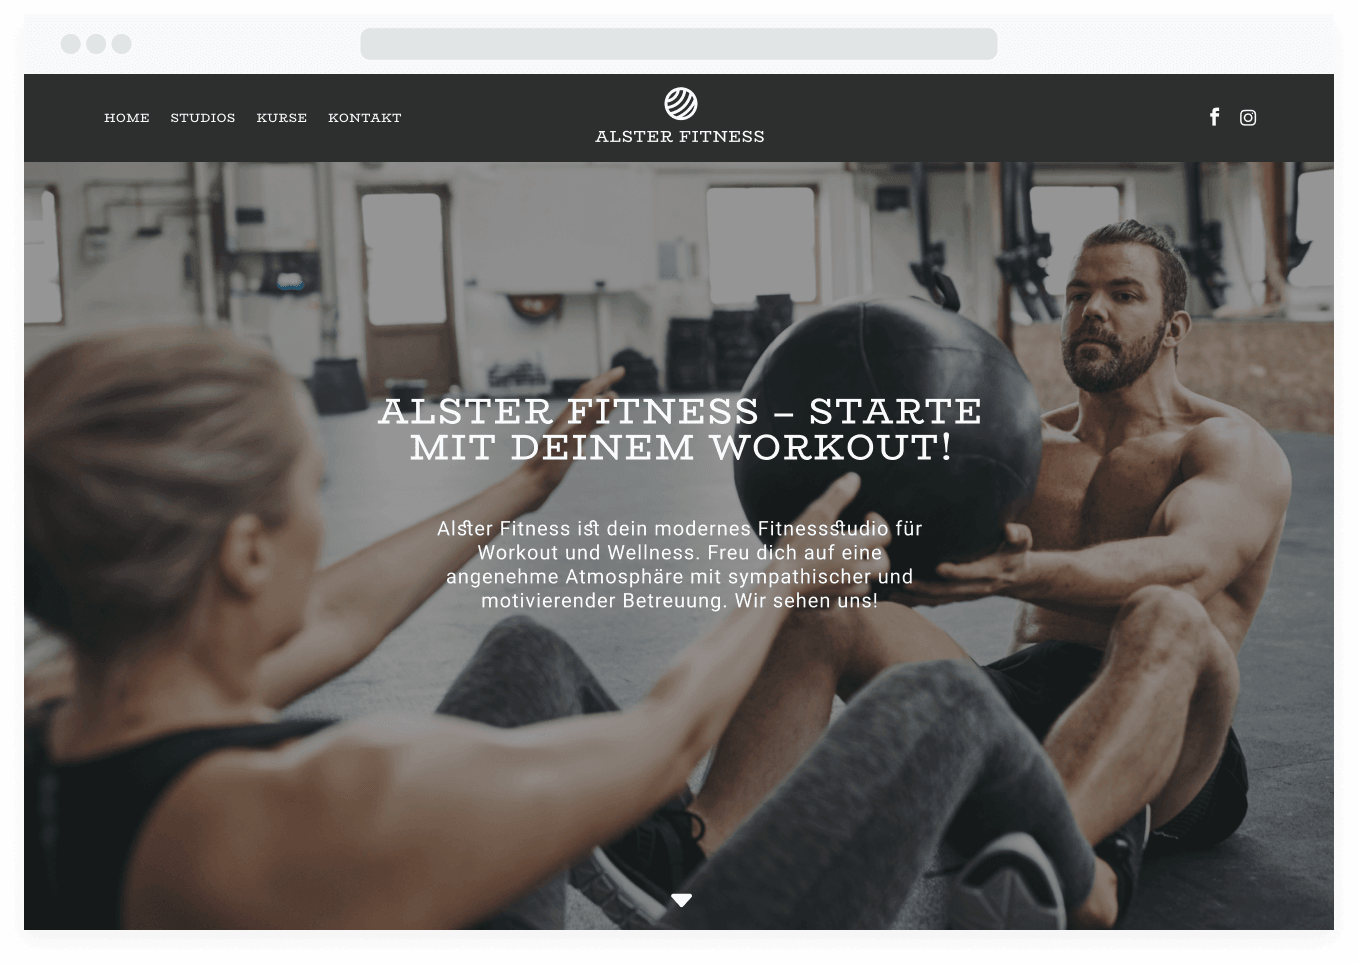 Example of a fitness website with the online booking tool